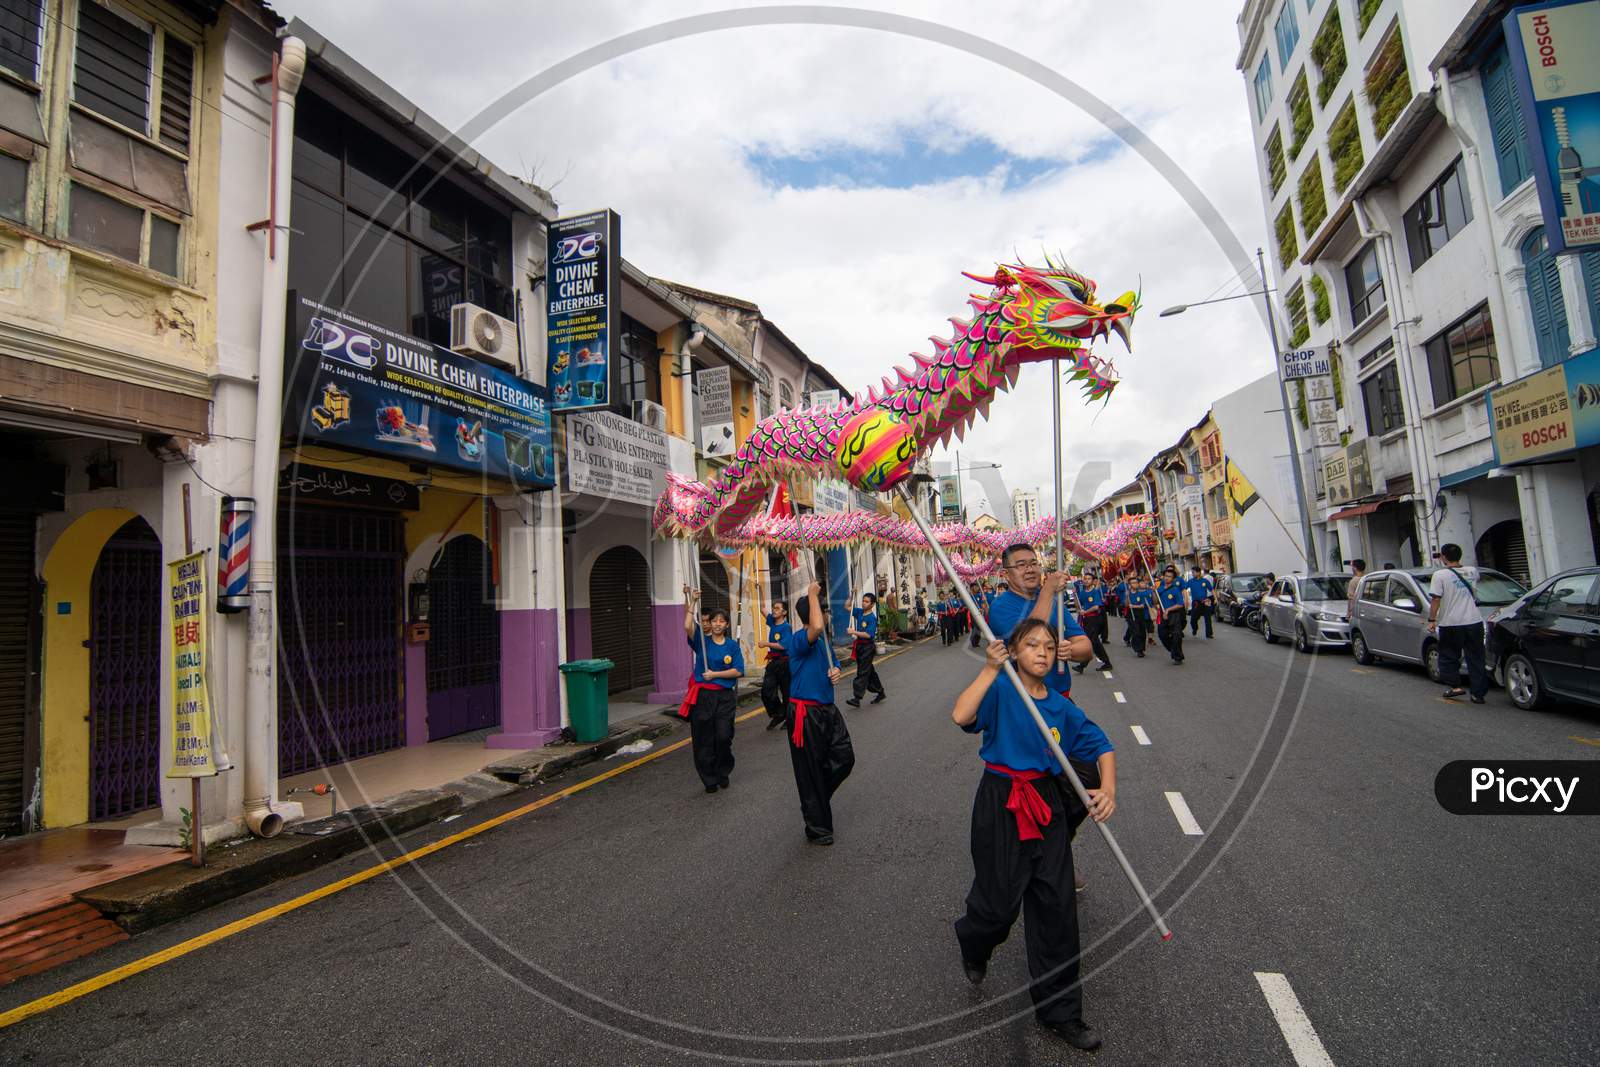 Group Of Man Perform Dragon Dance At Street